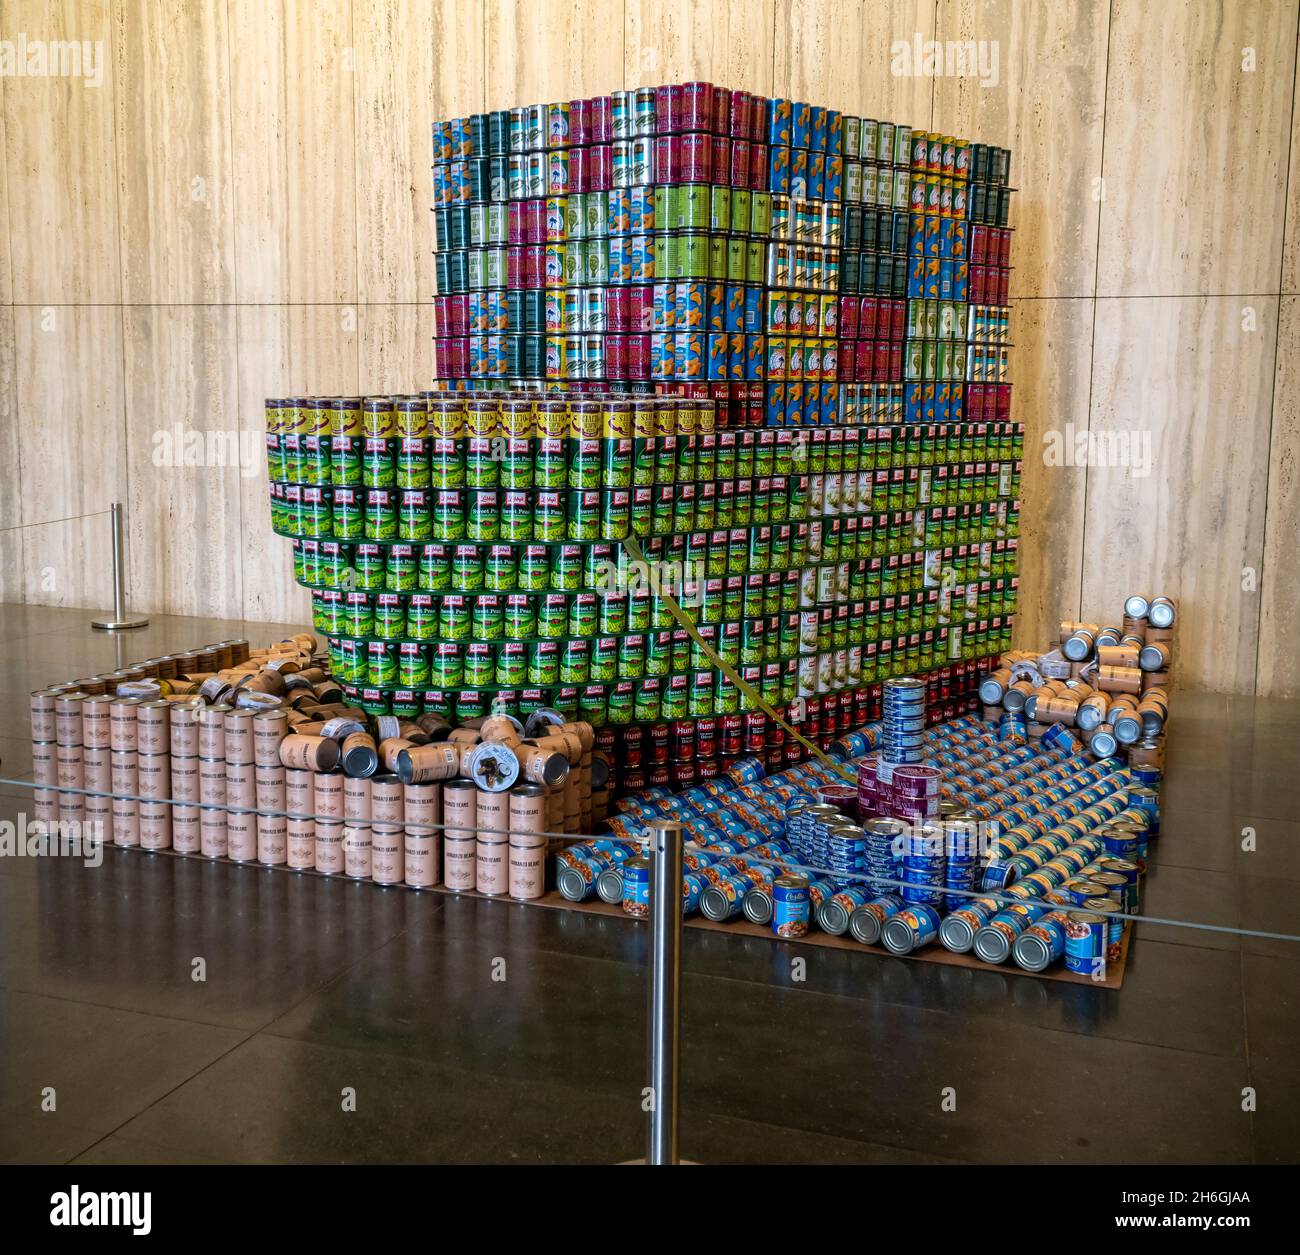 Visitors view CAN-tainers Stuck in the Suez CAN-al by AKF Group at the annual Canstruction Design Competition in New York, seen on Sunday, November 7, 2021, on display in Brookfield Place in New York. Architecture and design firm participate to design and build giant structures made from cans of food.  The cans are donated to City Harvest at the close of the exhibit. Over 100,000 cans of food are collected and will be used to feed the needy at soup kitchens and food pantries. (© Richard B. Levine) Stock Photo